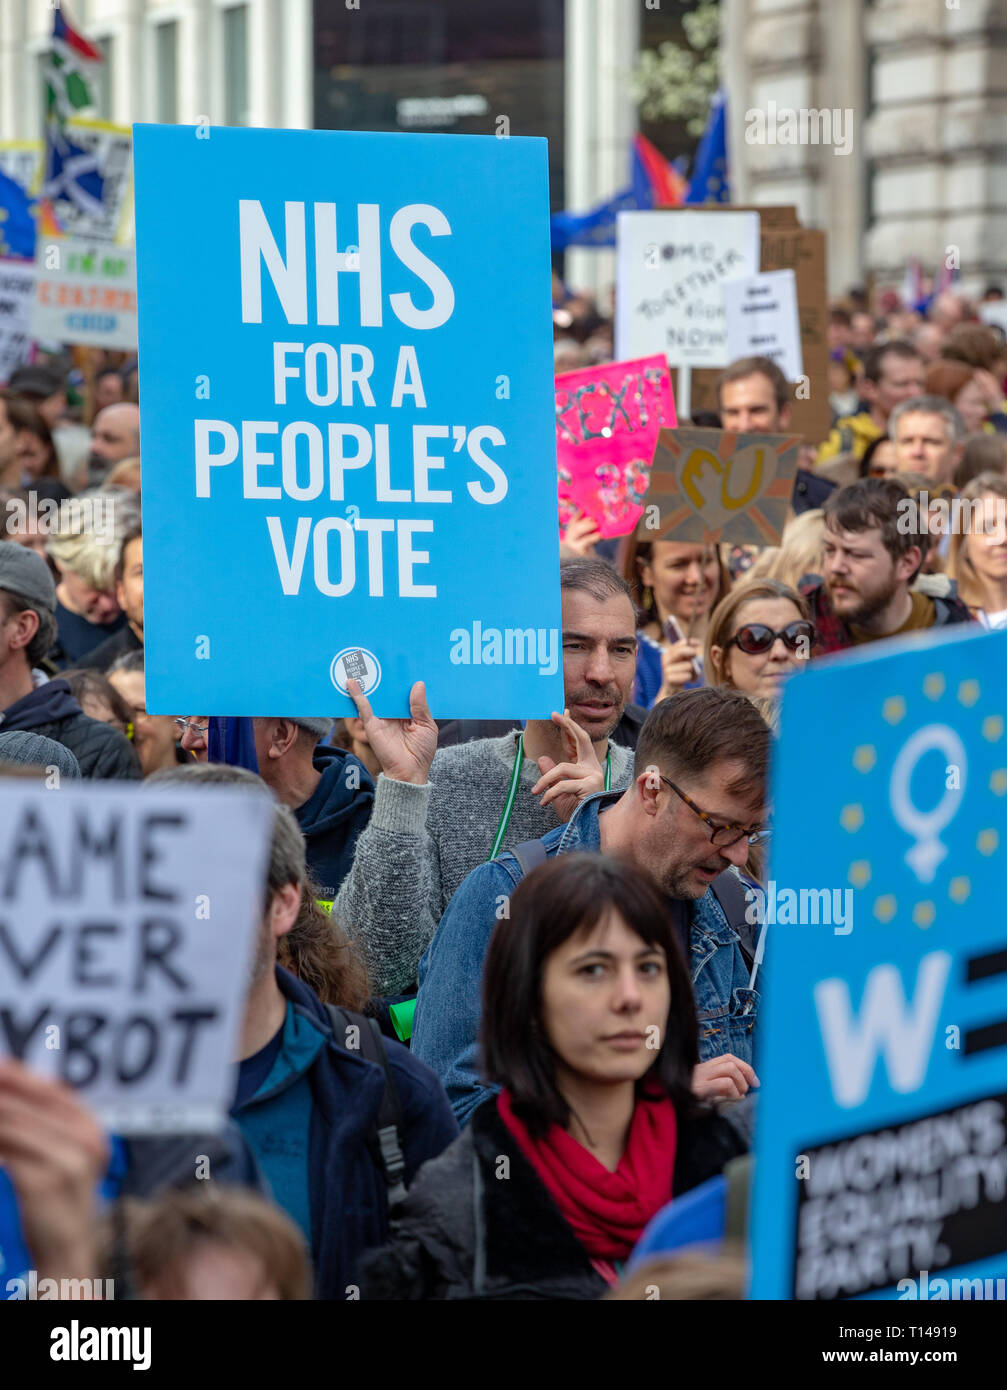 London, UK. 23rd Mar, 2019. More than a million people march through central London calling for another EU referendum in what is called 'The People's March'. They joined arally in front of parliament. Credit: Tommy London/Alamy Live News Stock Photo